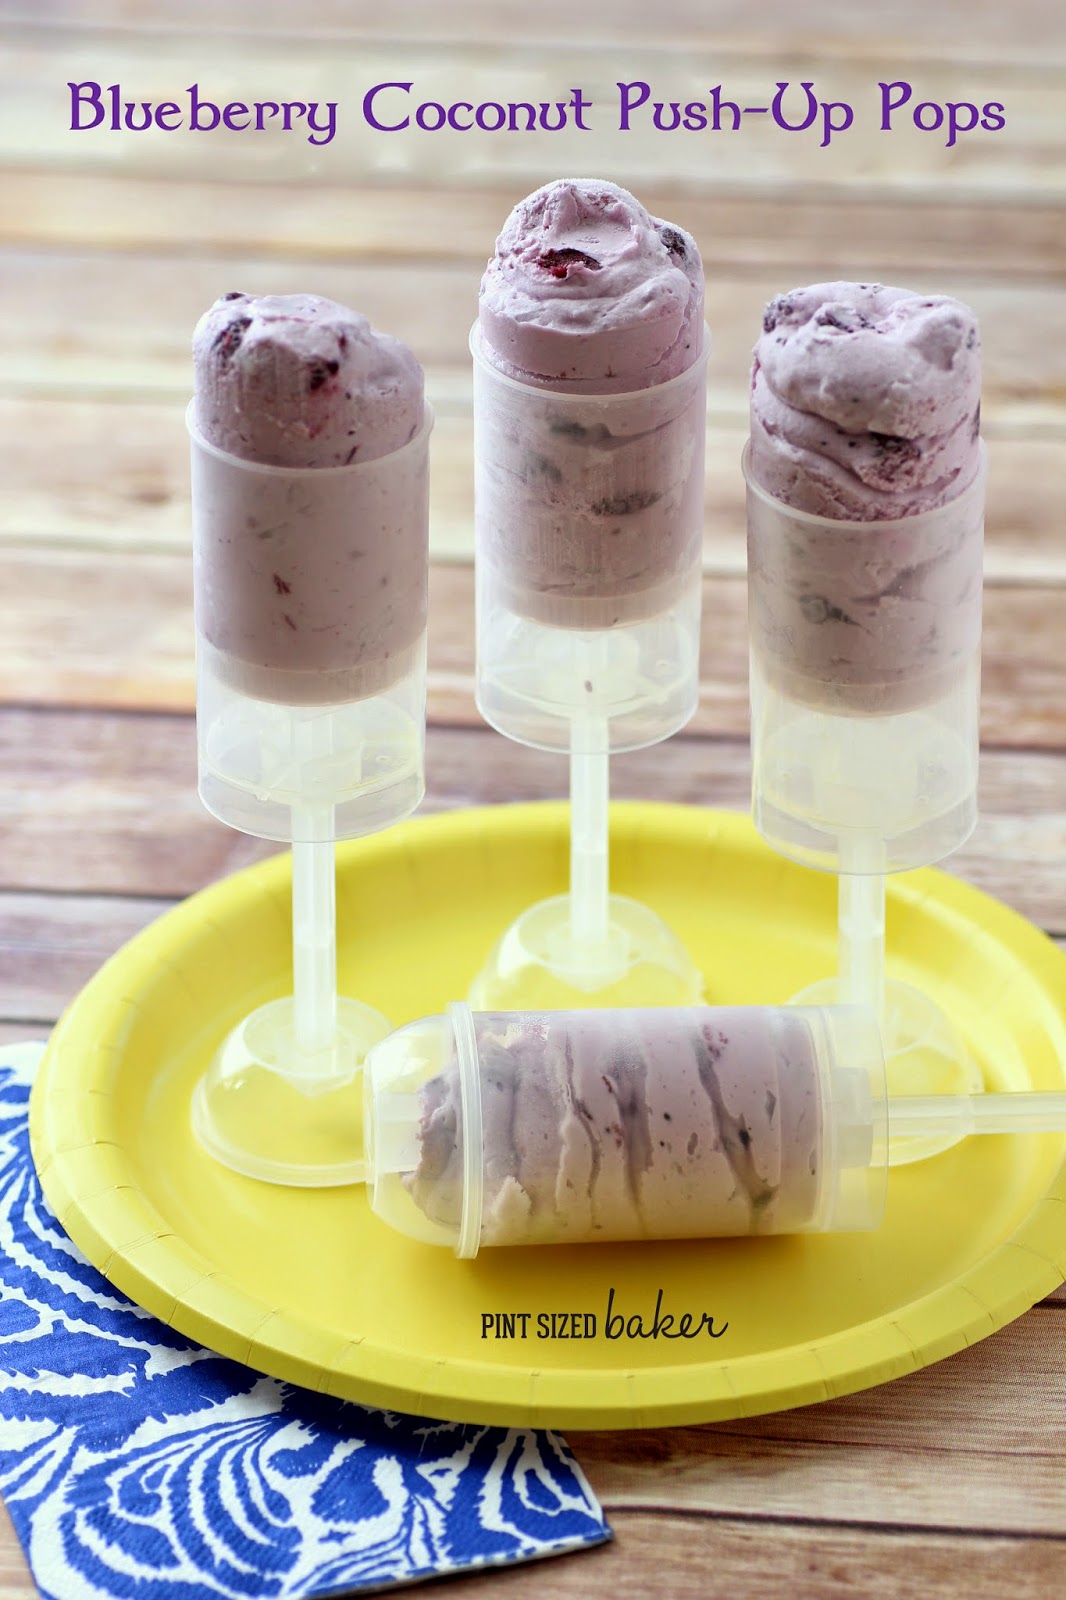 How to make frozen Blueberry Coconut Push-up Pops.